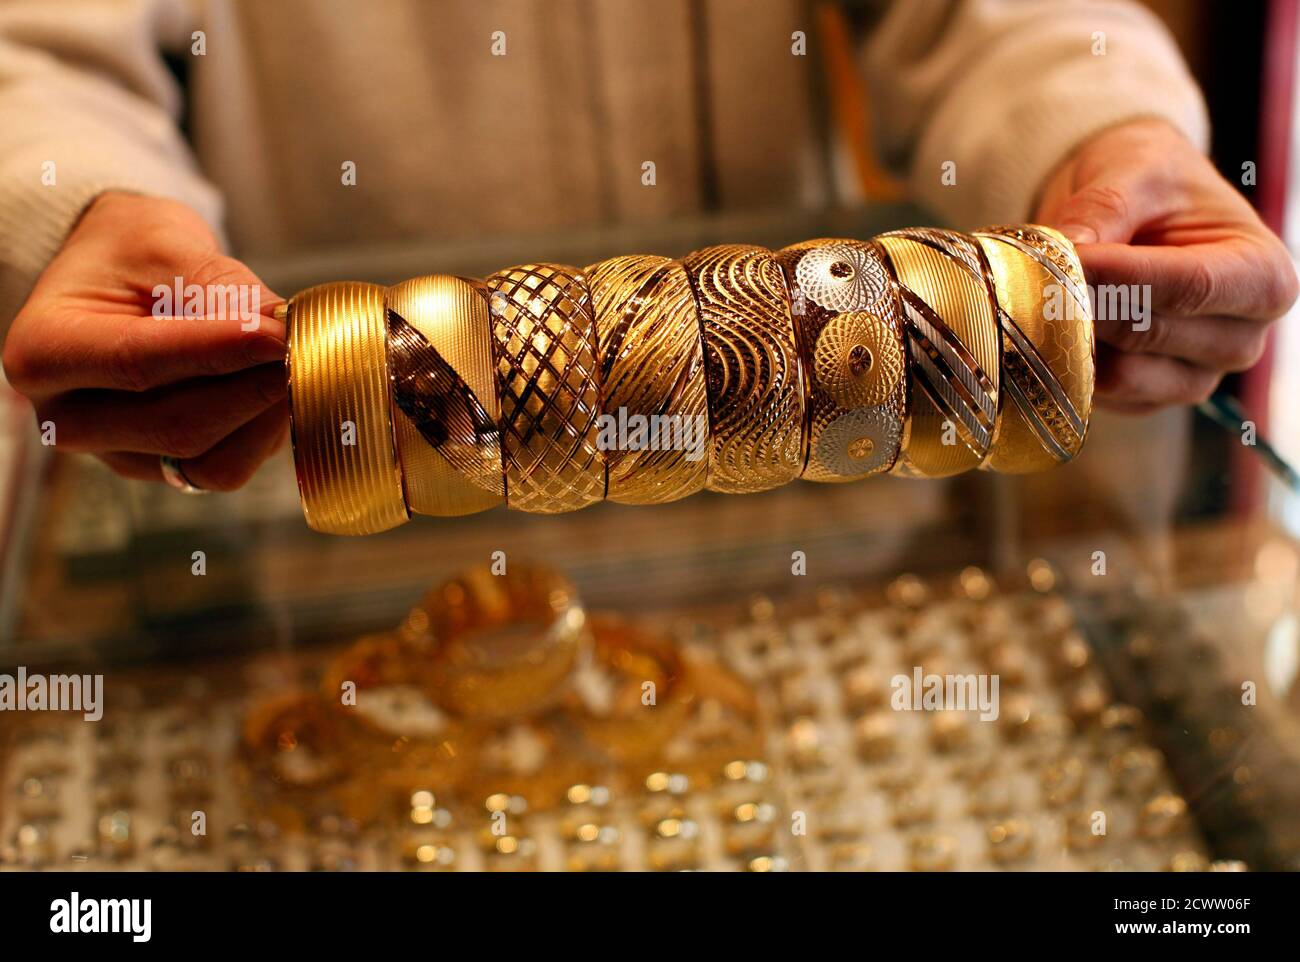 A goldsmith displays gold bangles in his jewellery shop in Istanbul April 22, 2011. Spot gold surged to a lifetime high on Friday in thin holiday trade, hitting a record for a sixth consecutive session on a weak dollar and factors ranging from geopolitical uncertainty to inflation concerns. REUTERS/Murad Sezer (TURKEY - Tags: BUSINESS) Stock Photo